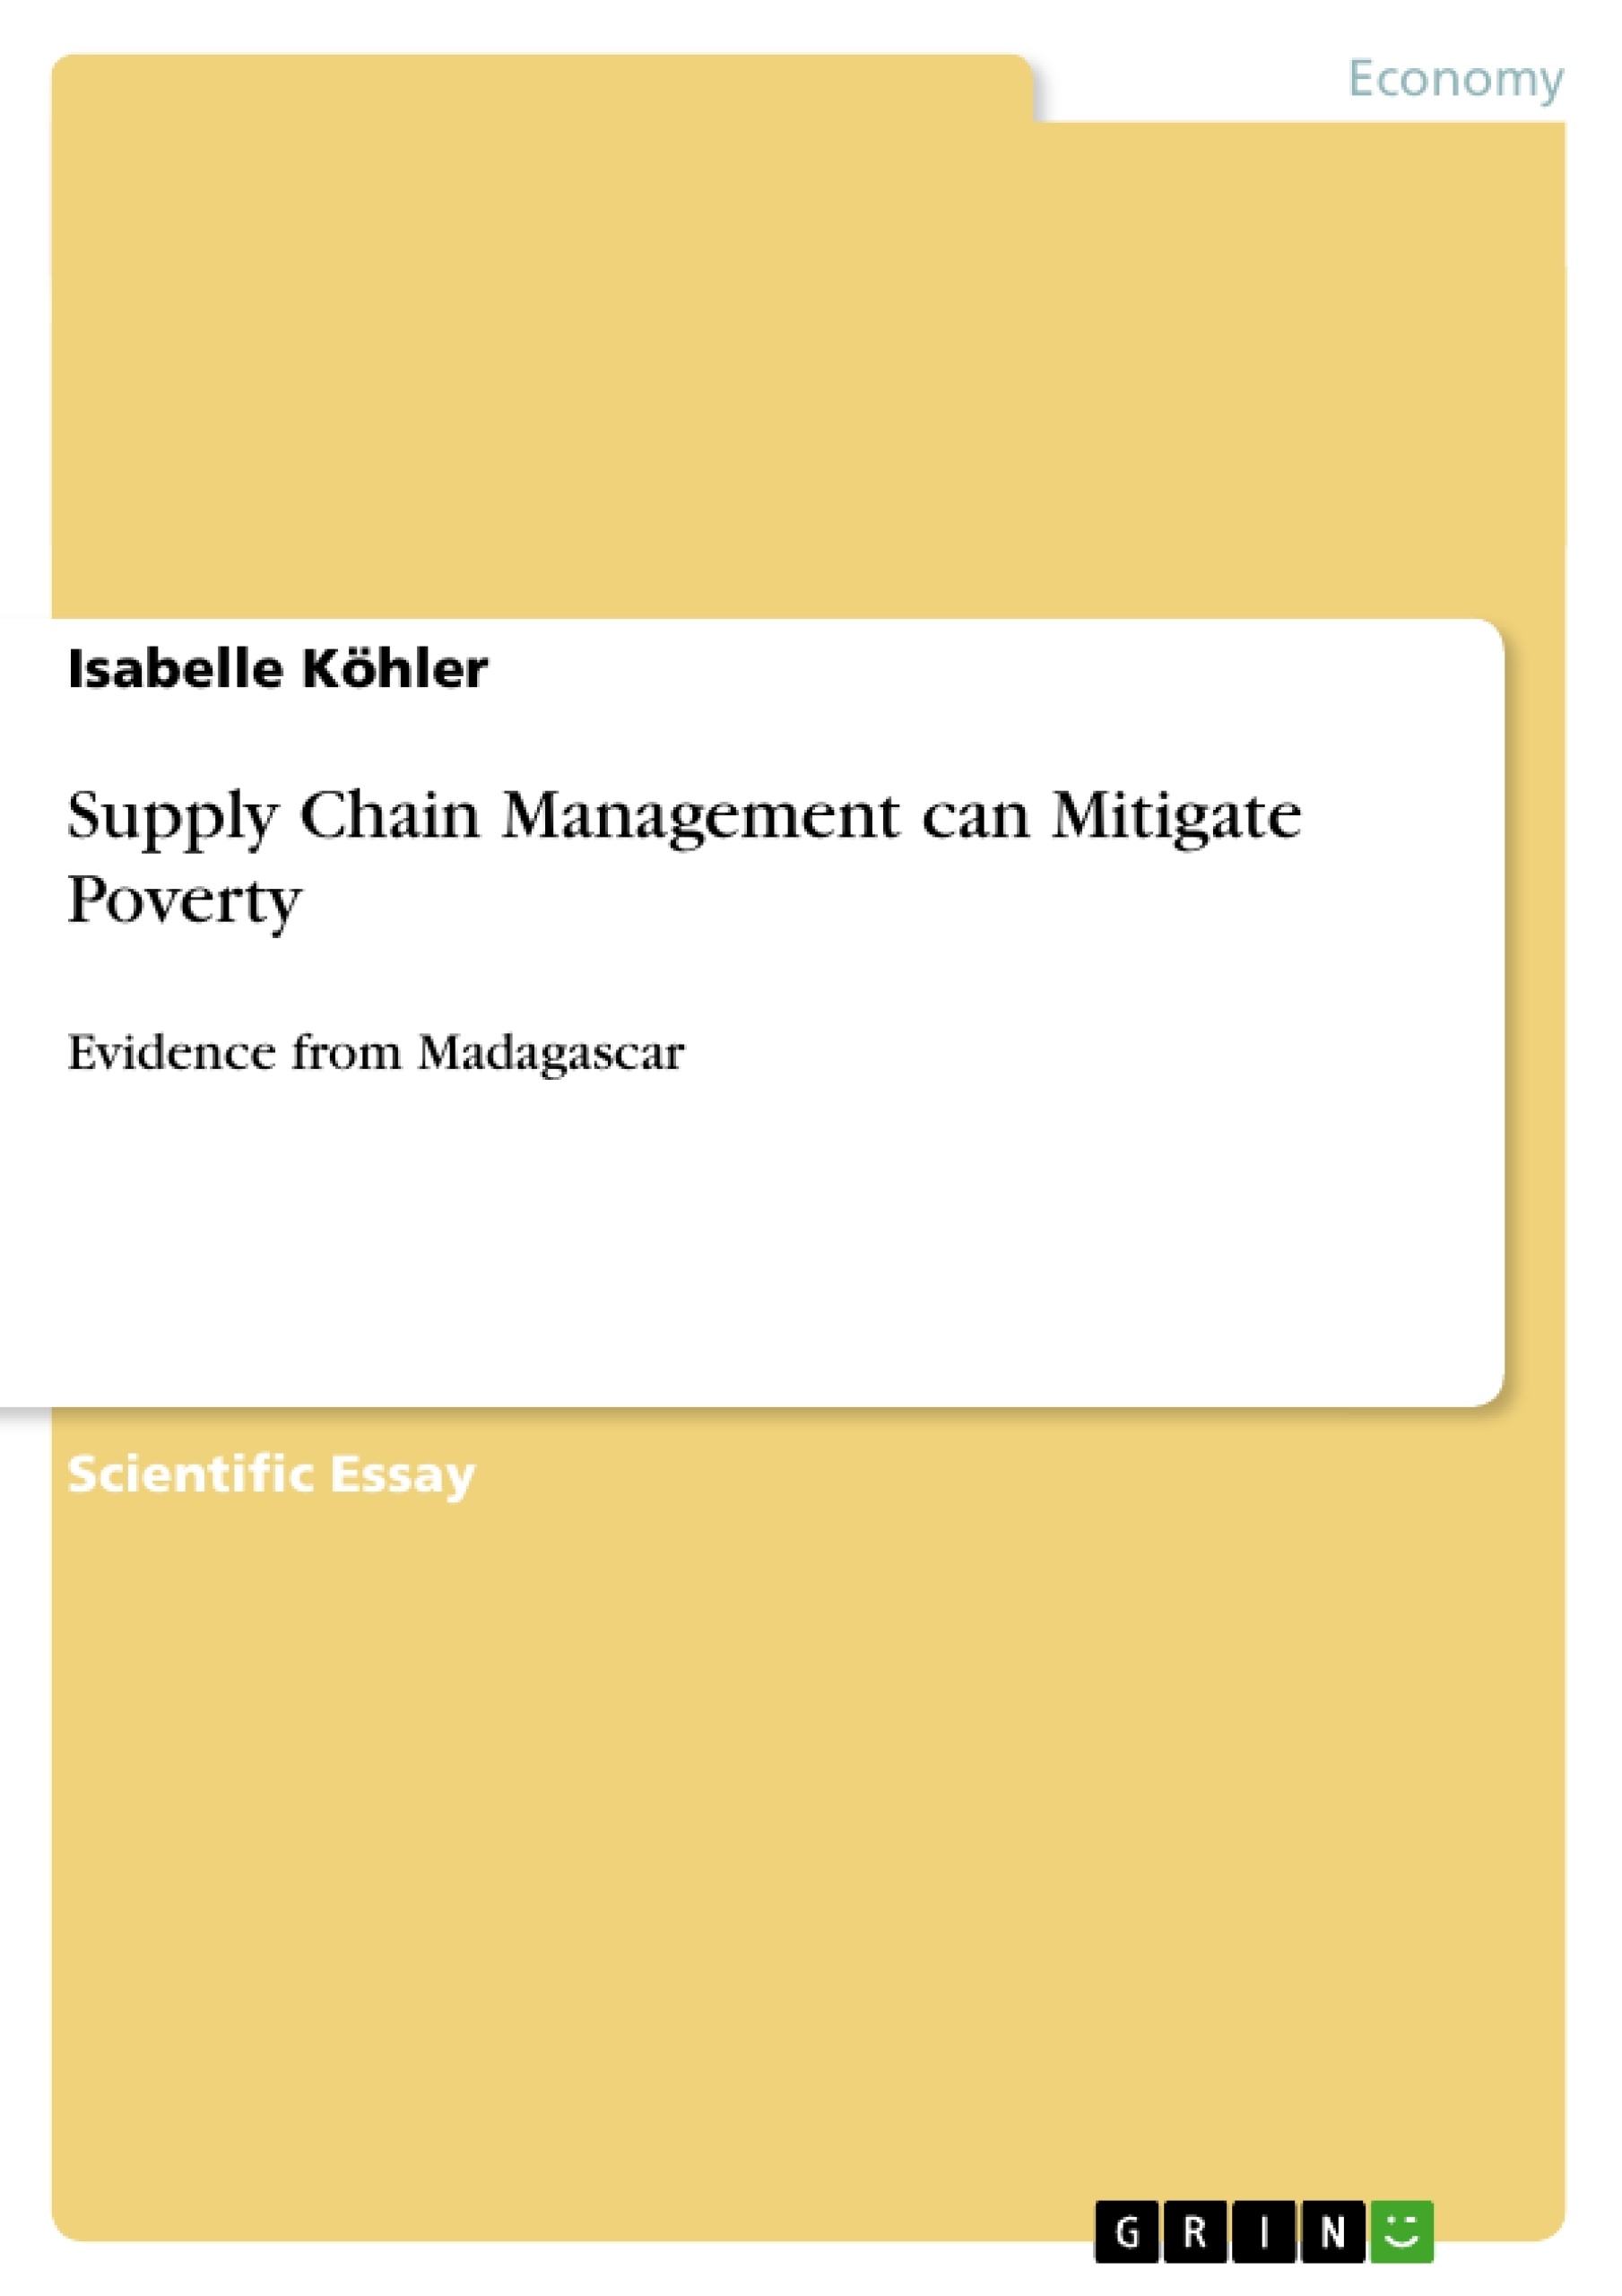 Title: Supply Chain Management can Mitigate Poverty